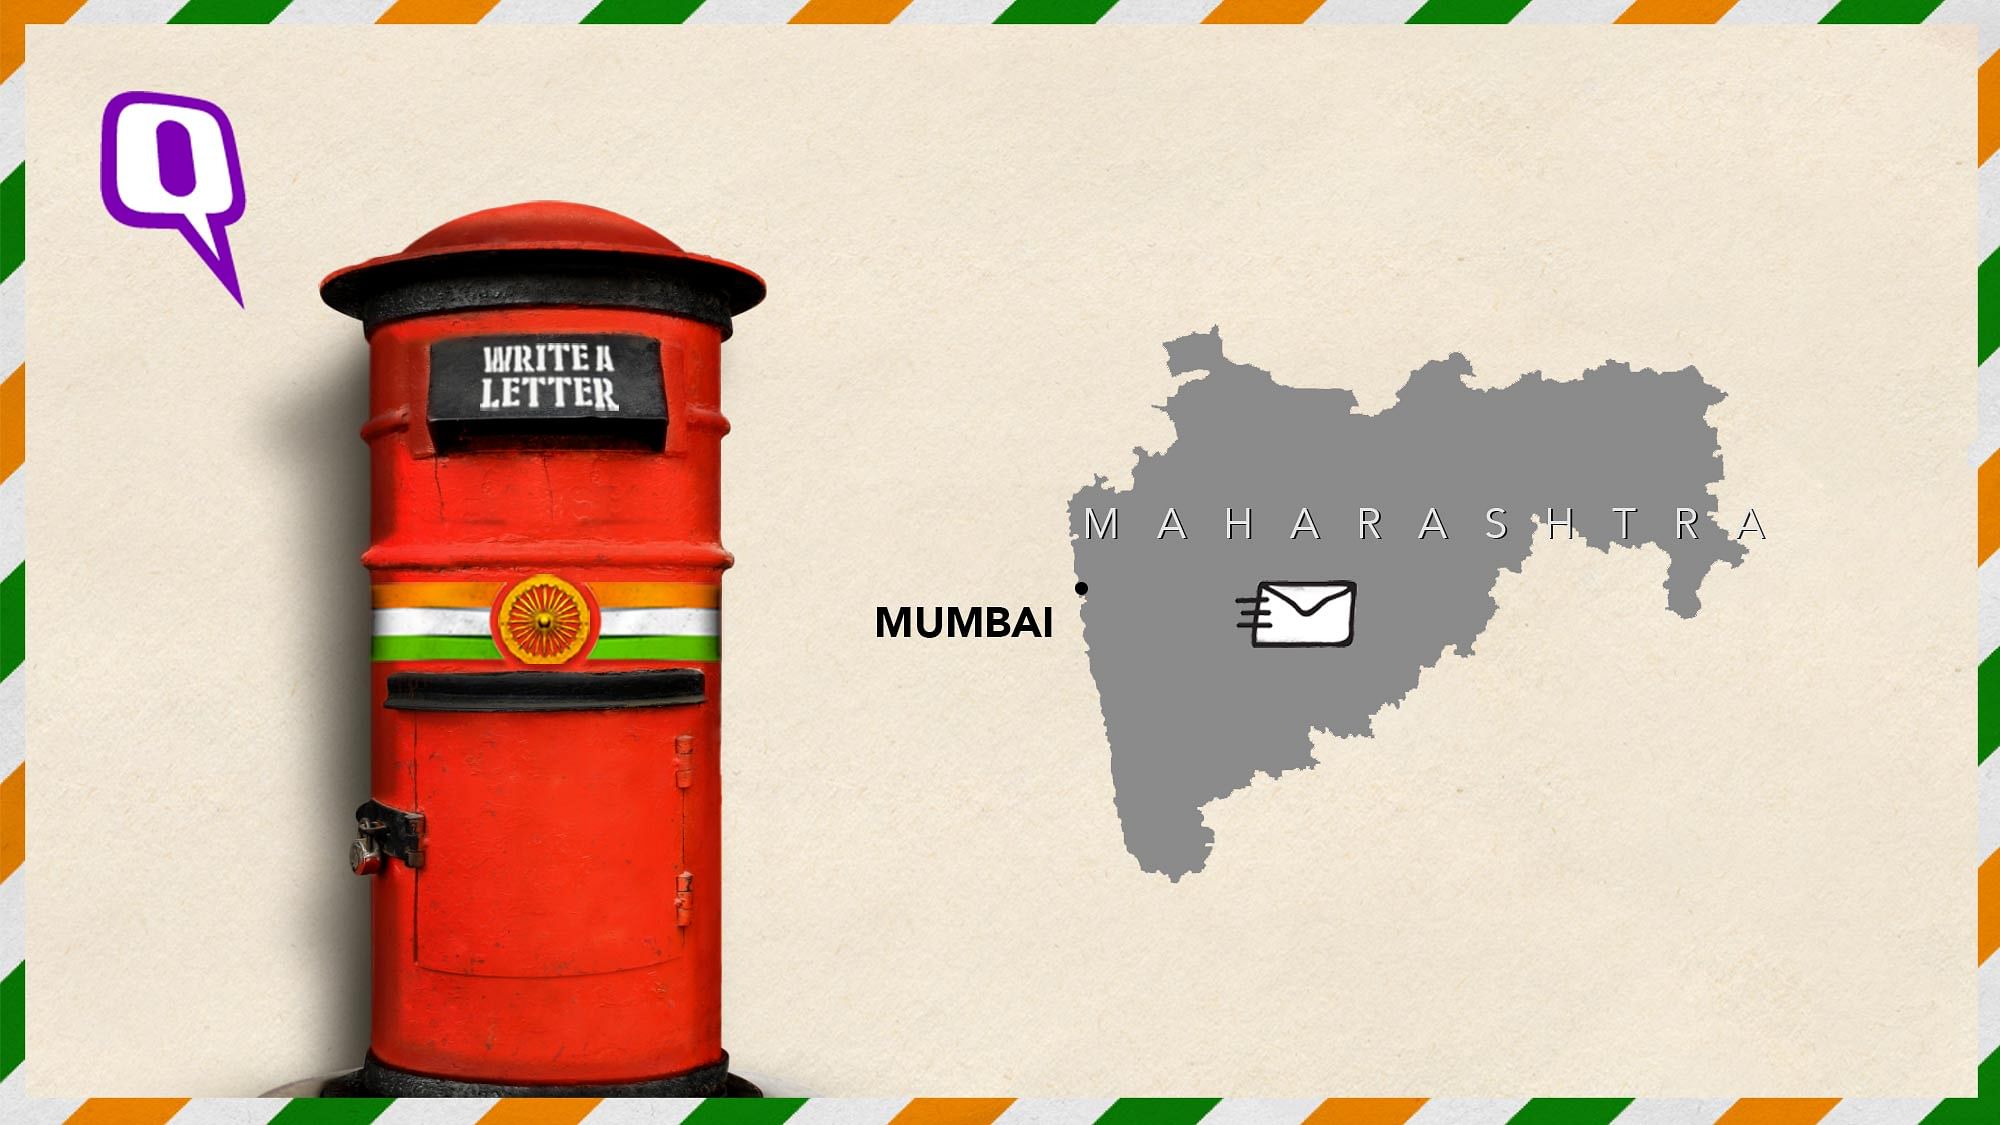 Write or record your letter to India for Republic Day 2020.